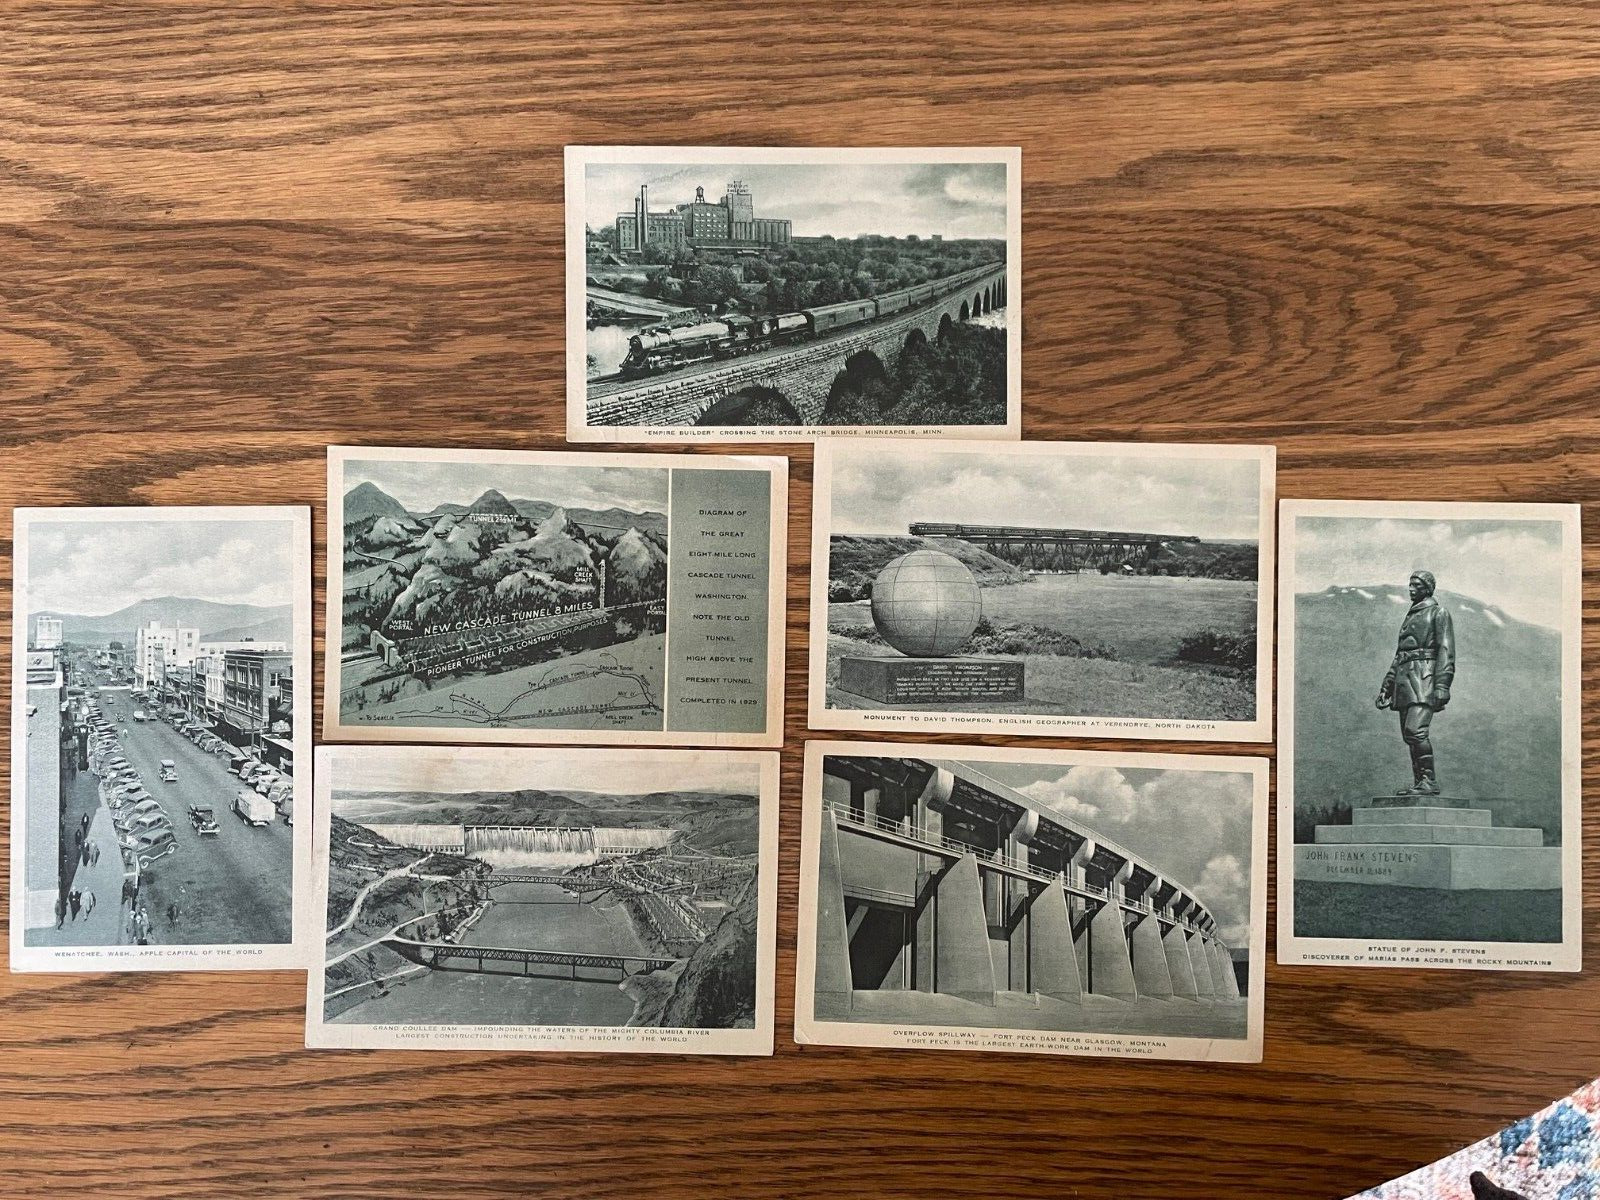 Lot of 7 Great Northern Railway Postcards, Railroad, Tunnel, Fort Peck Dam